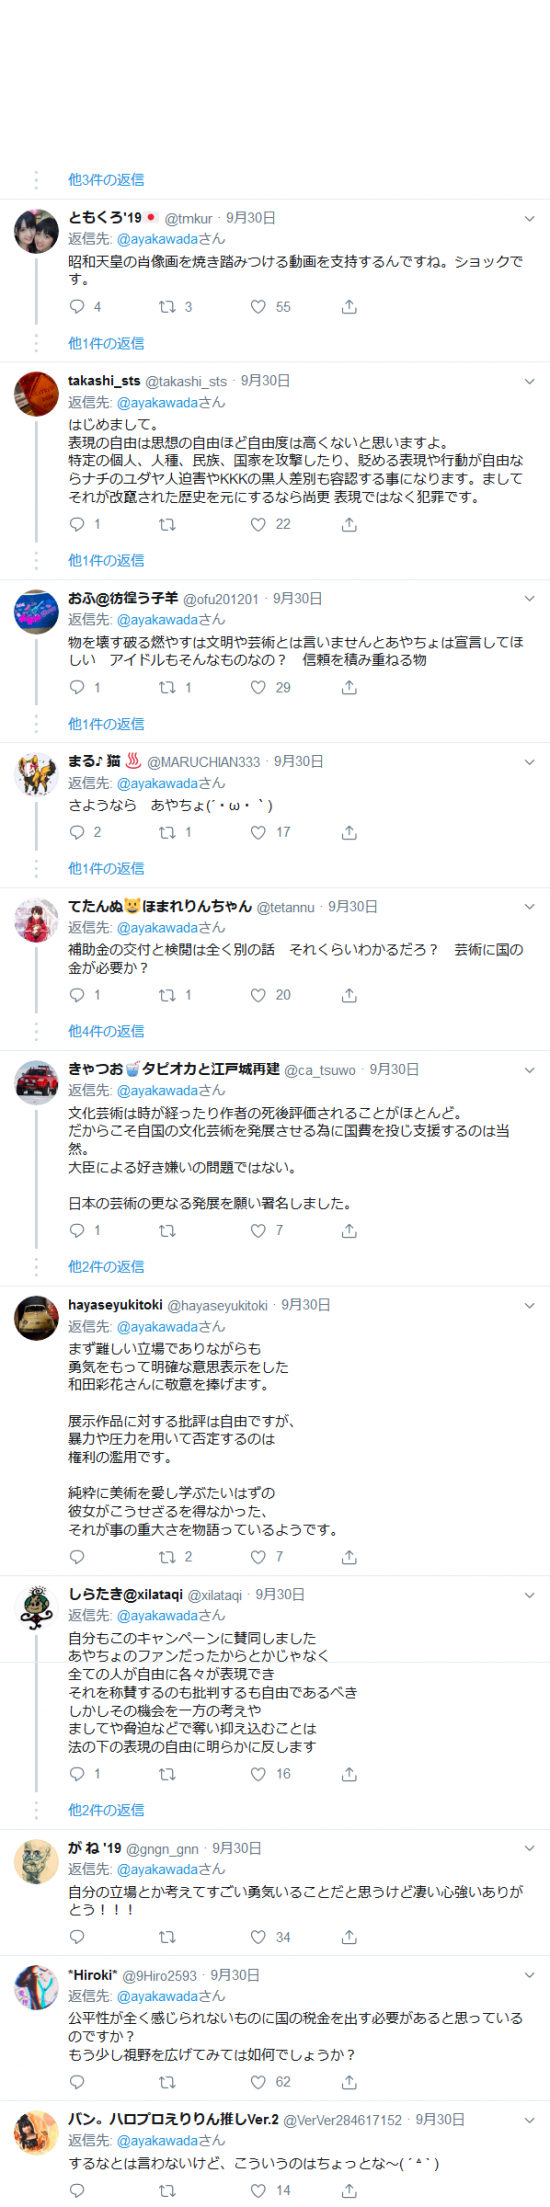 Screenshot_2019-10-08 和田彩花さんはTwitterを使っています 「https t co F0asyH3GNh」 Twitter(1).png